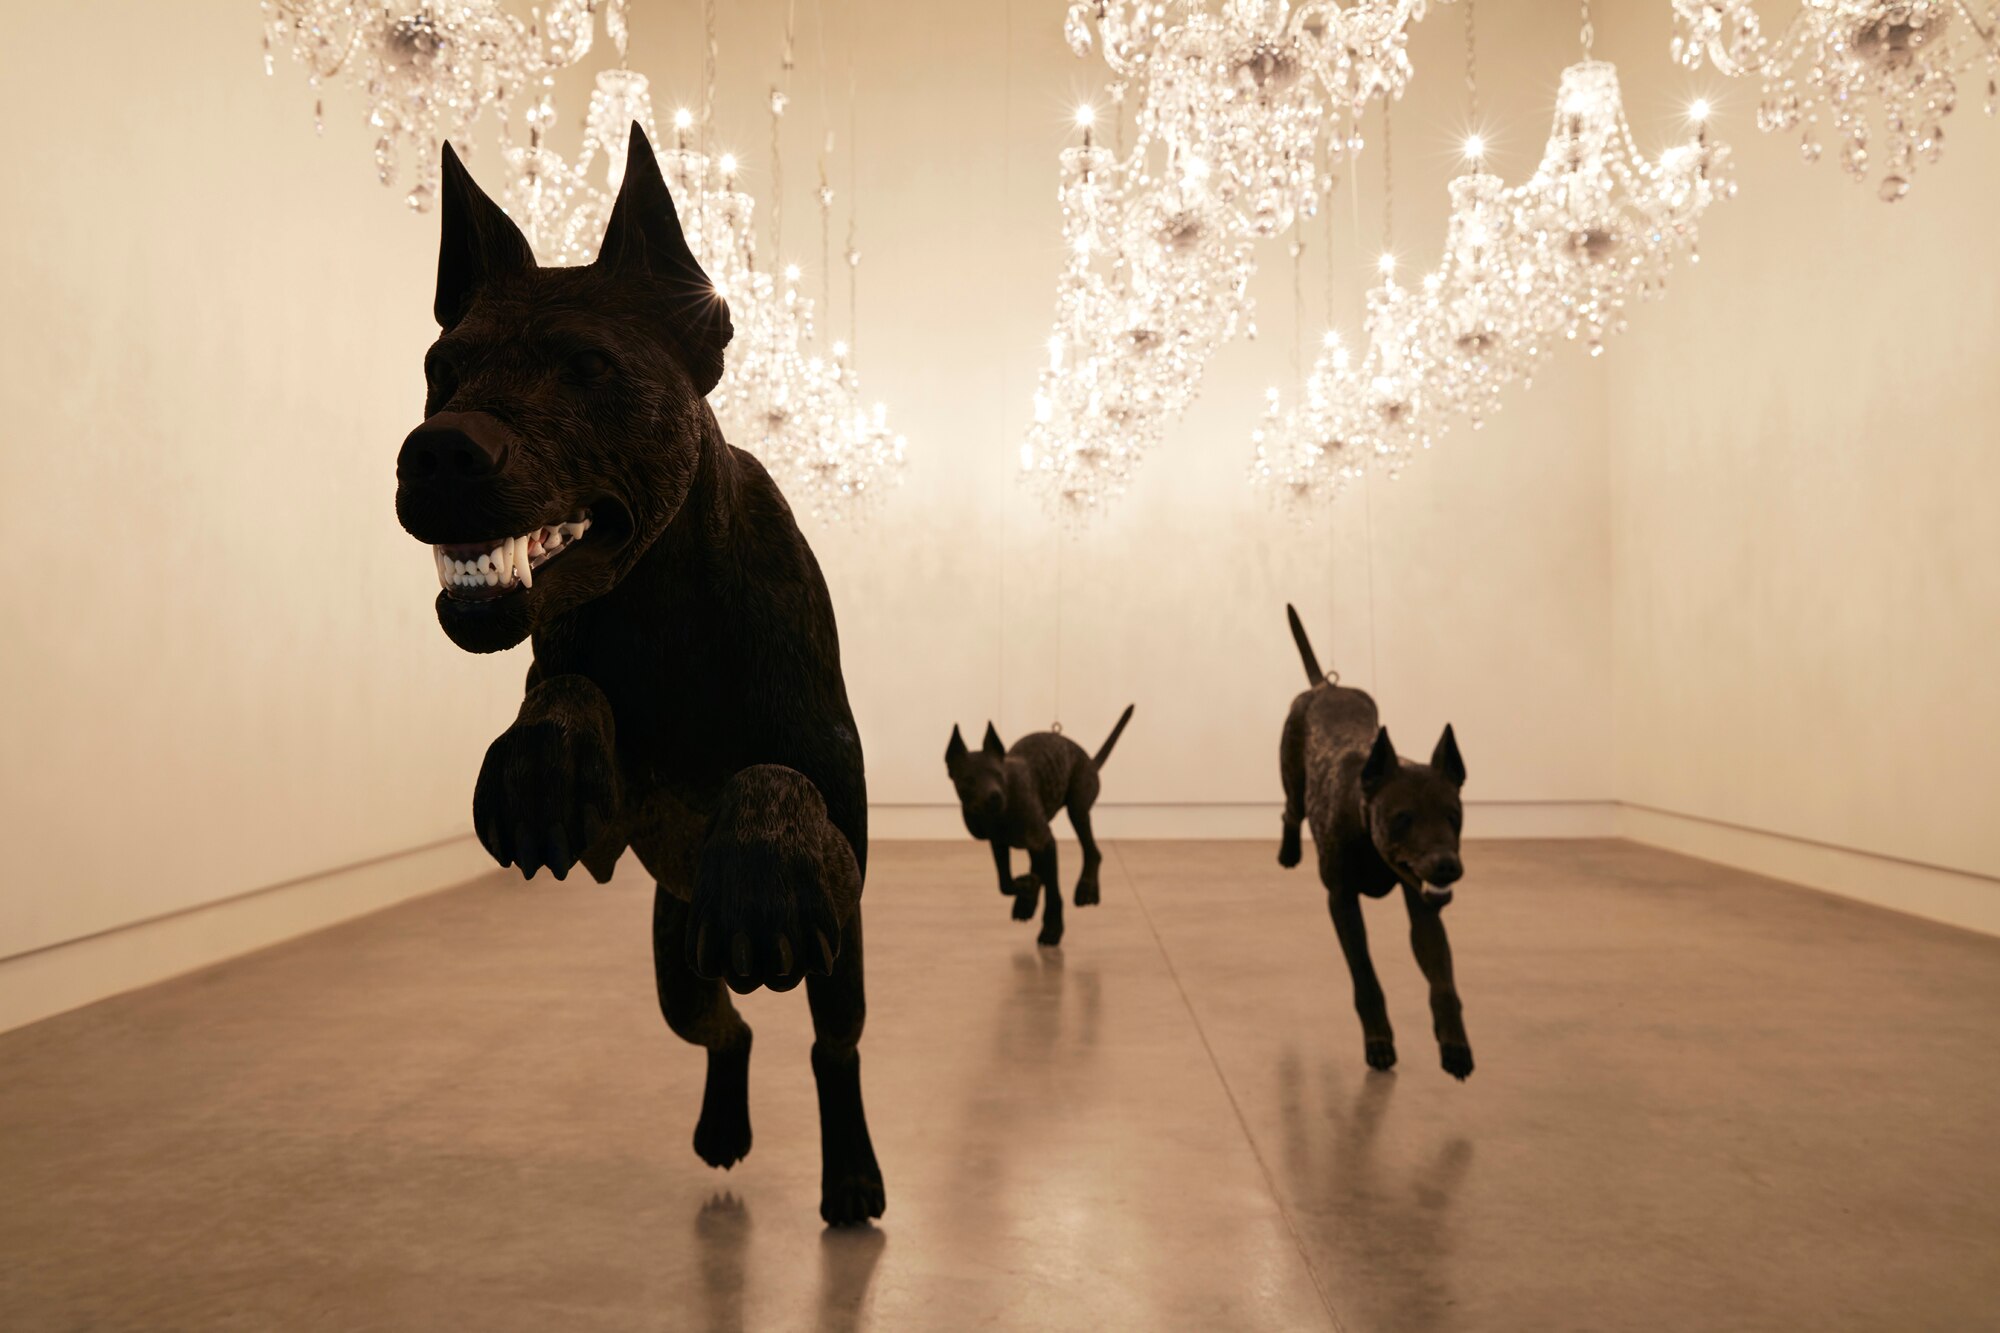 Three black, wooden dogs with bared fangs are posed mid-chase under a ceiling full of glittering crystal chandeliers.